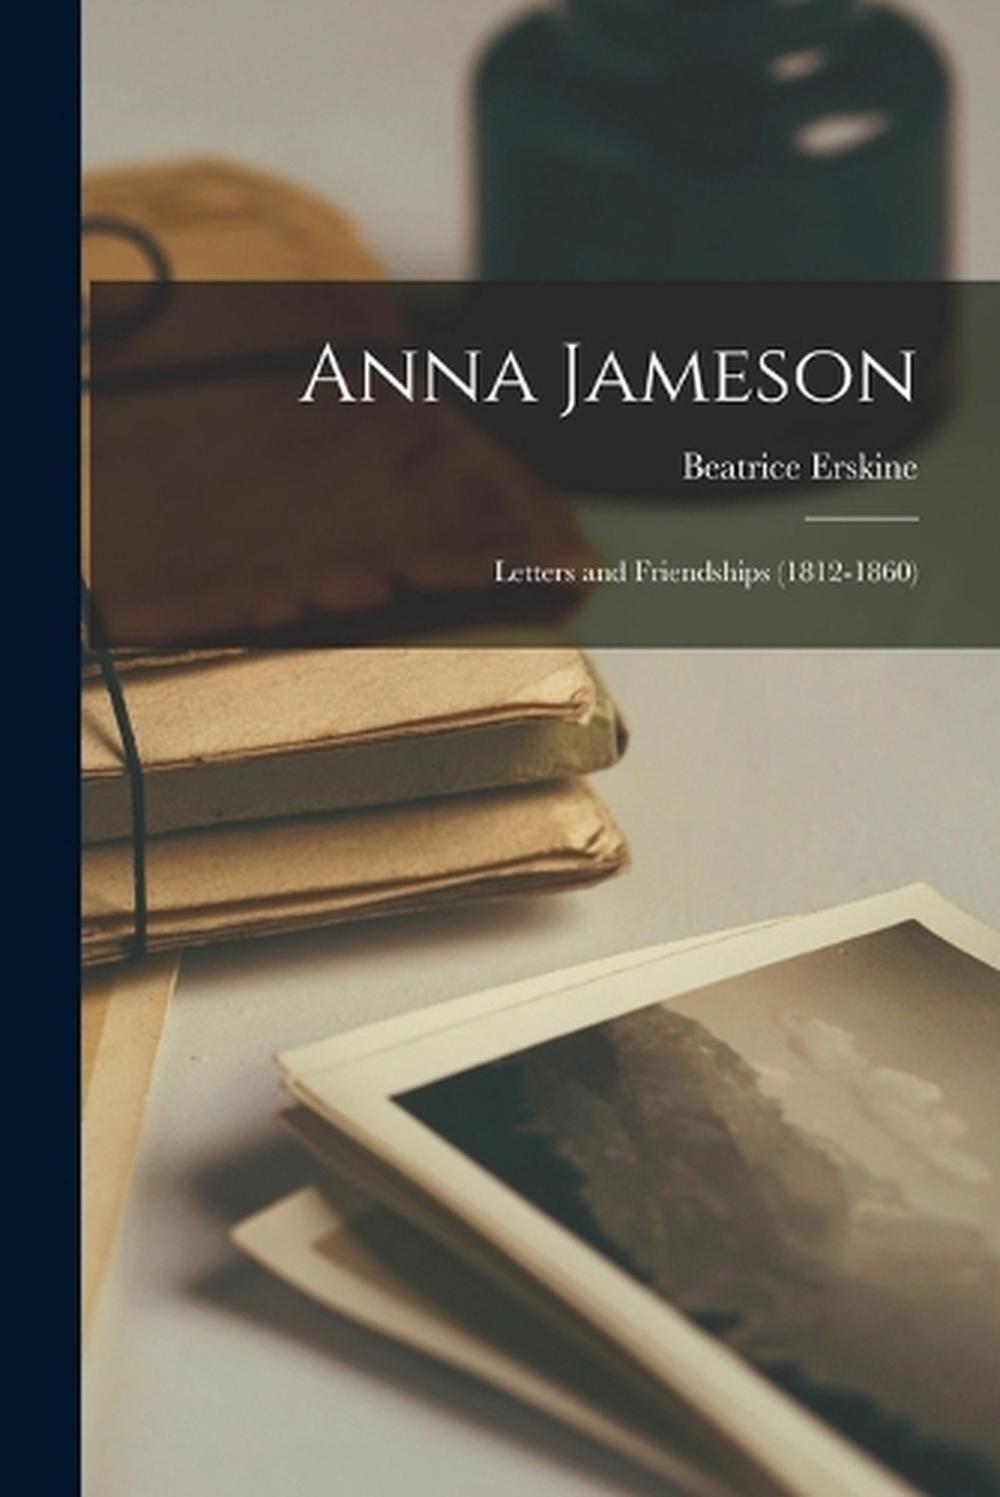 Anna Jameson: Letters and Friendships (1812-1860) by 1794-1860 Jameson (English)